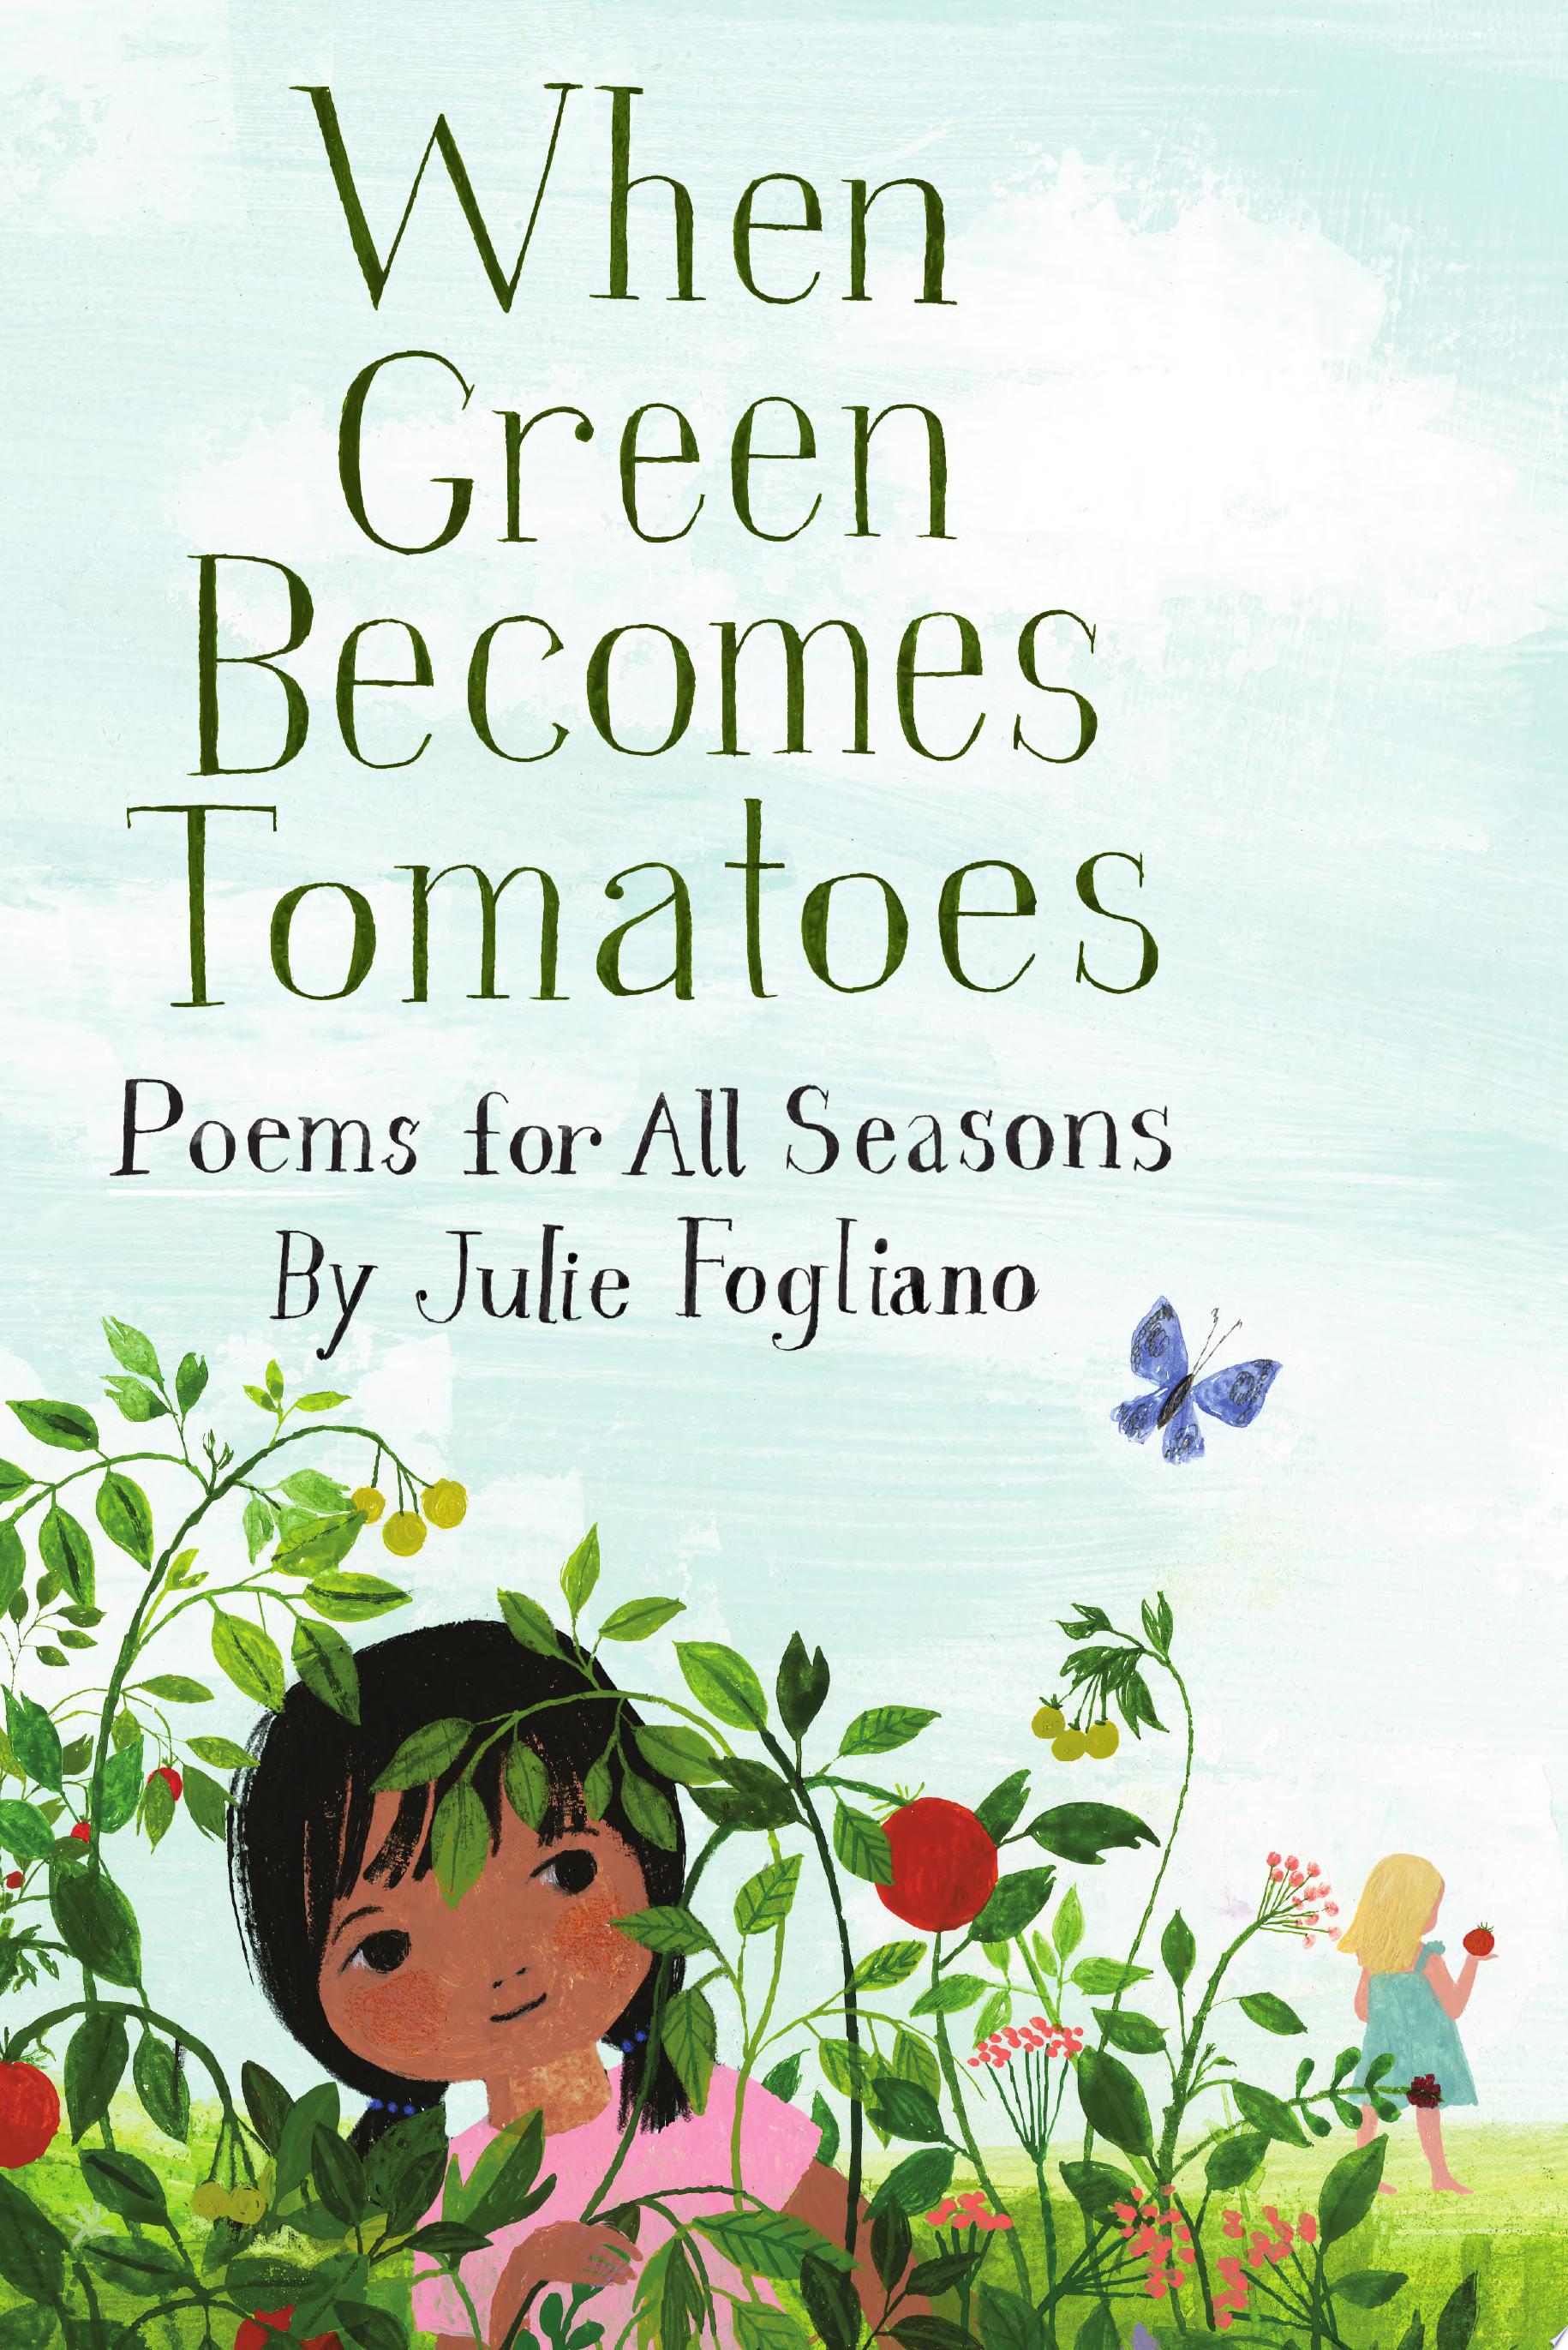 Image for "When Green Becomes Tomatoes"